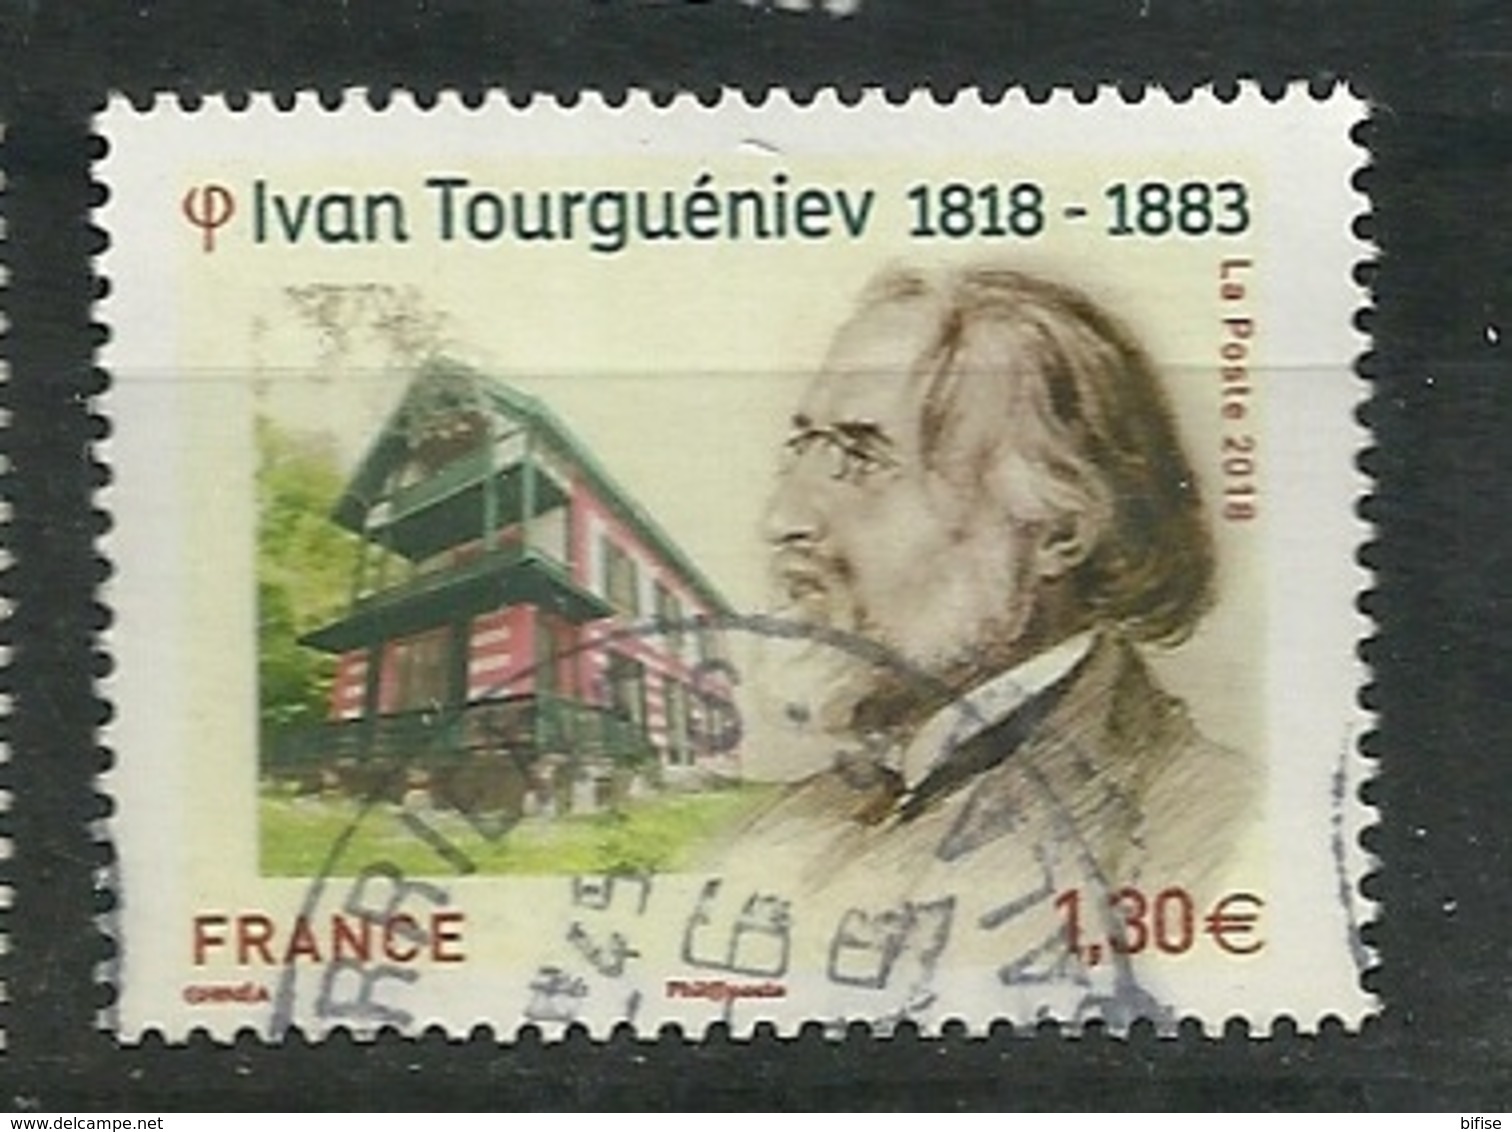 FRANCIA 2018 - Ivan Tourguéniev - Cachet Rond - Used Stamps